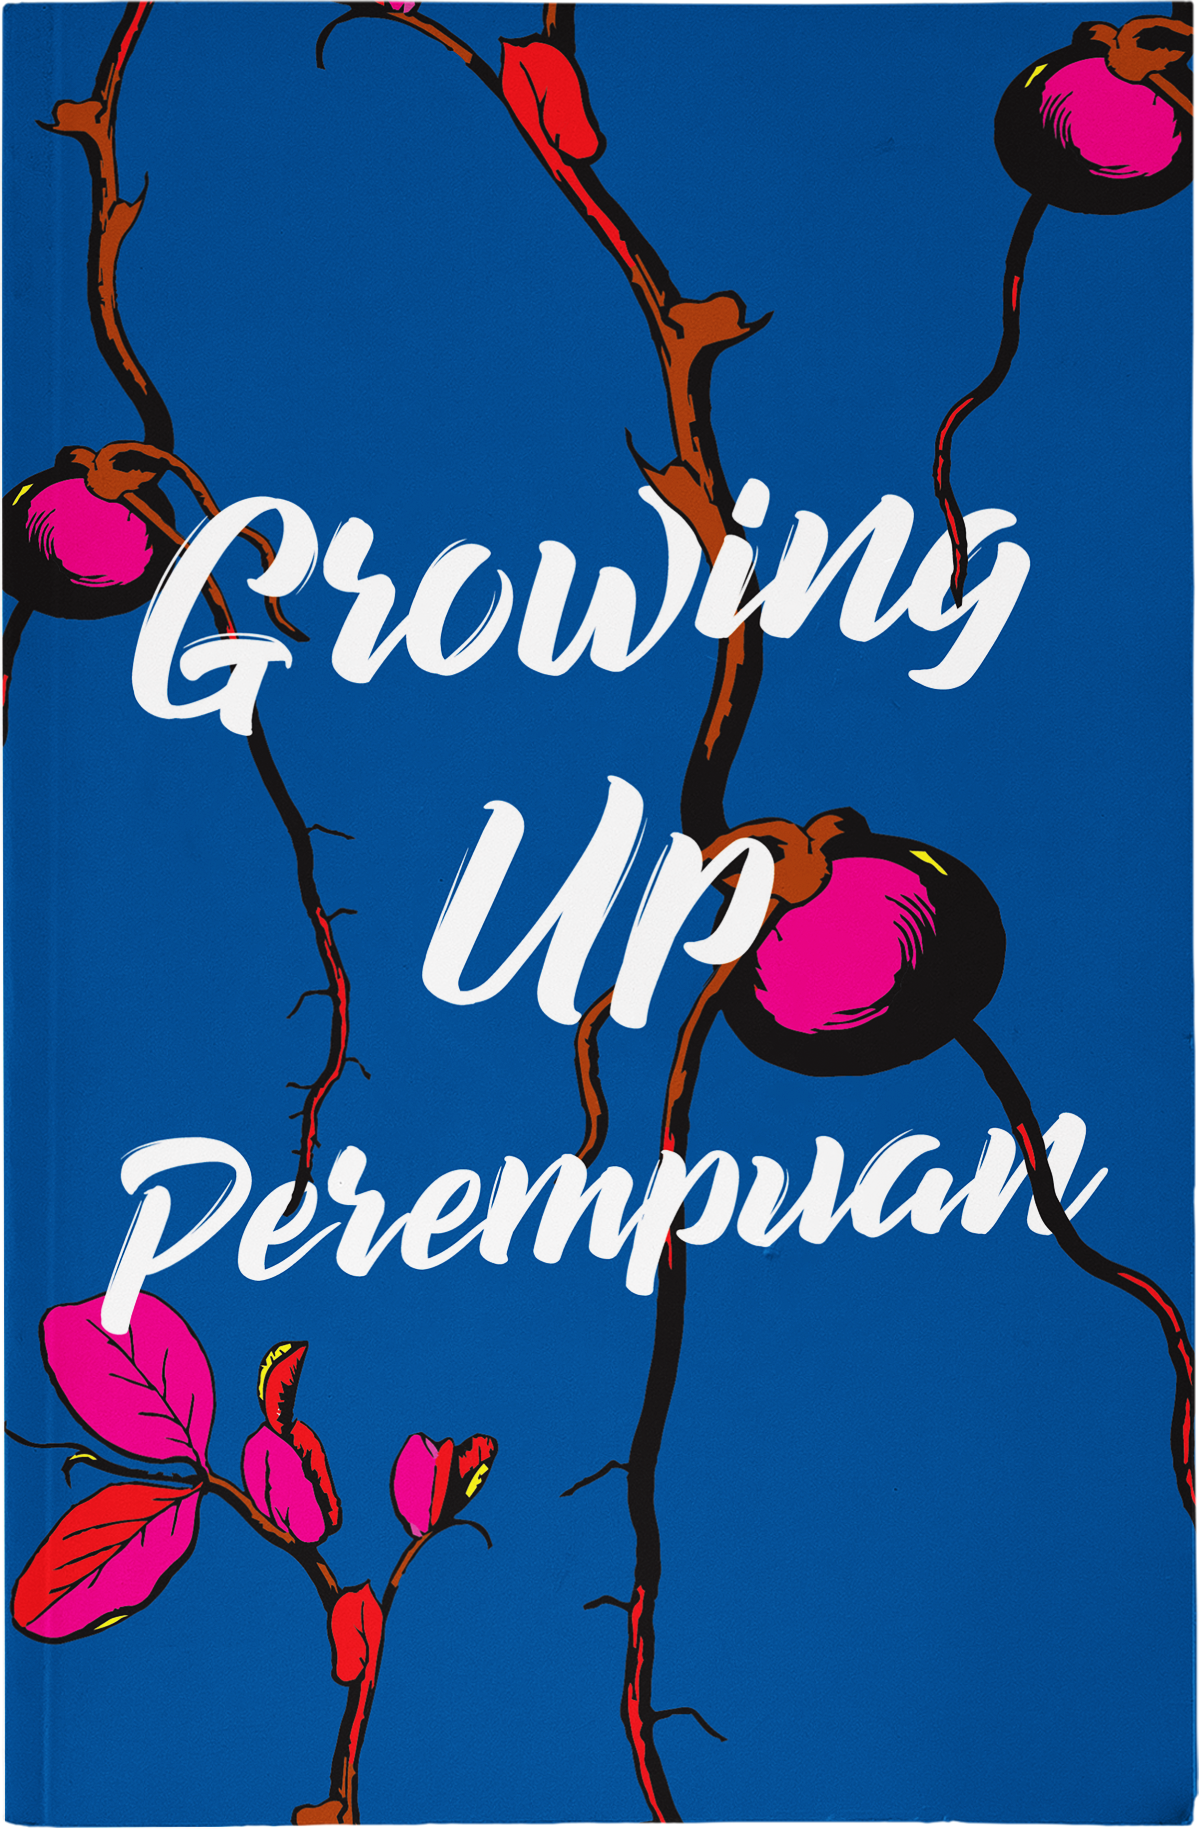 Ethos　Up　–　Perempuan　Growing　Books